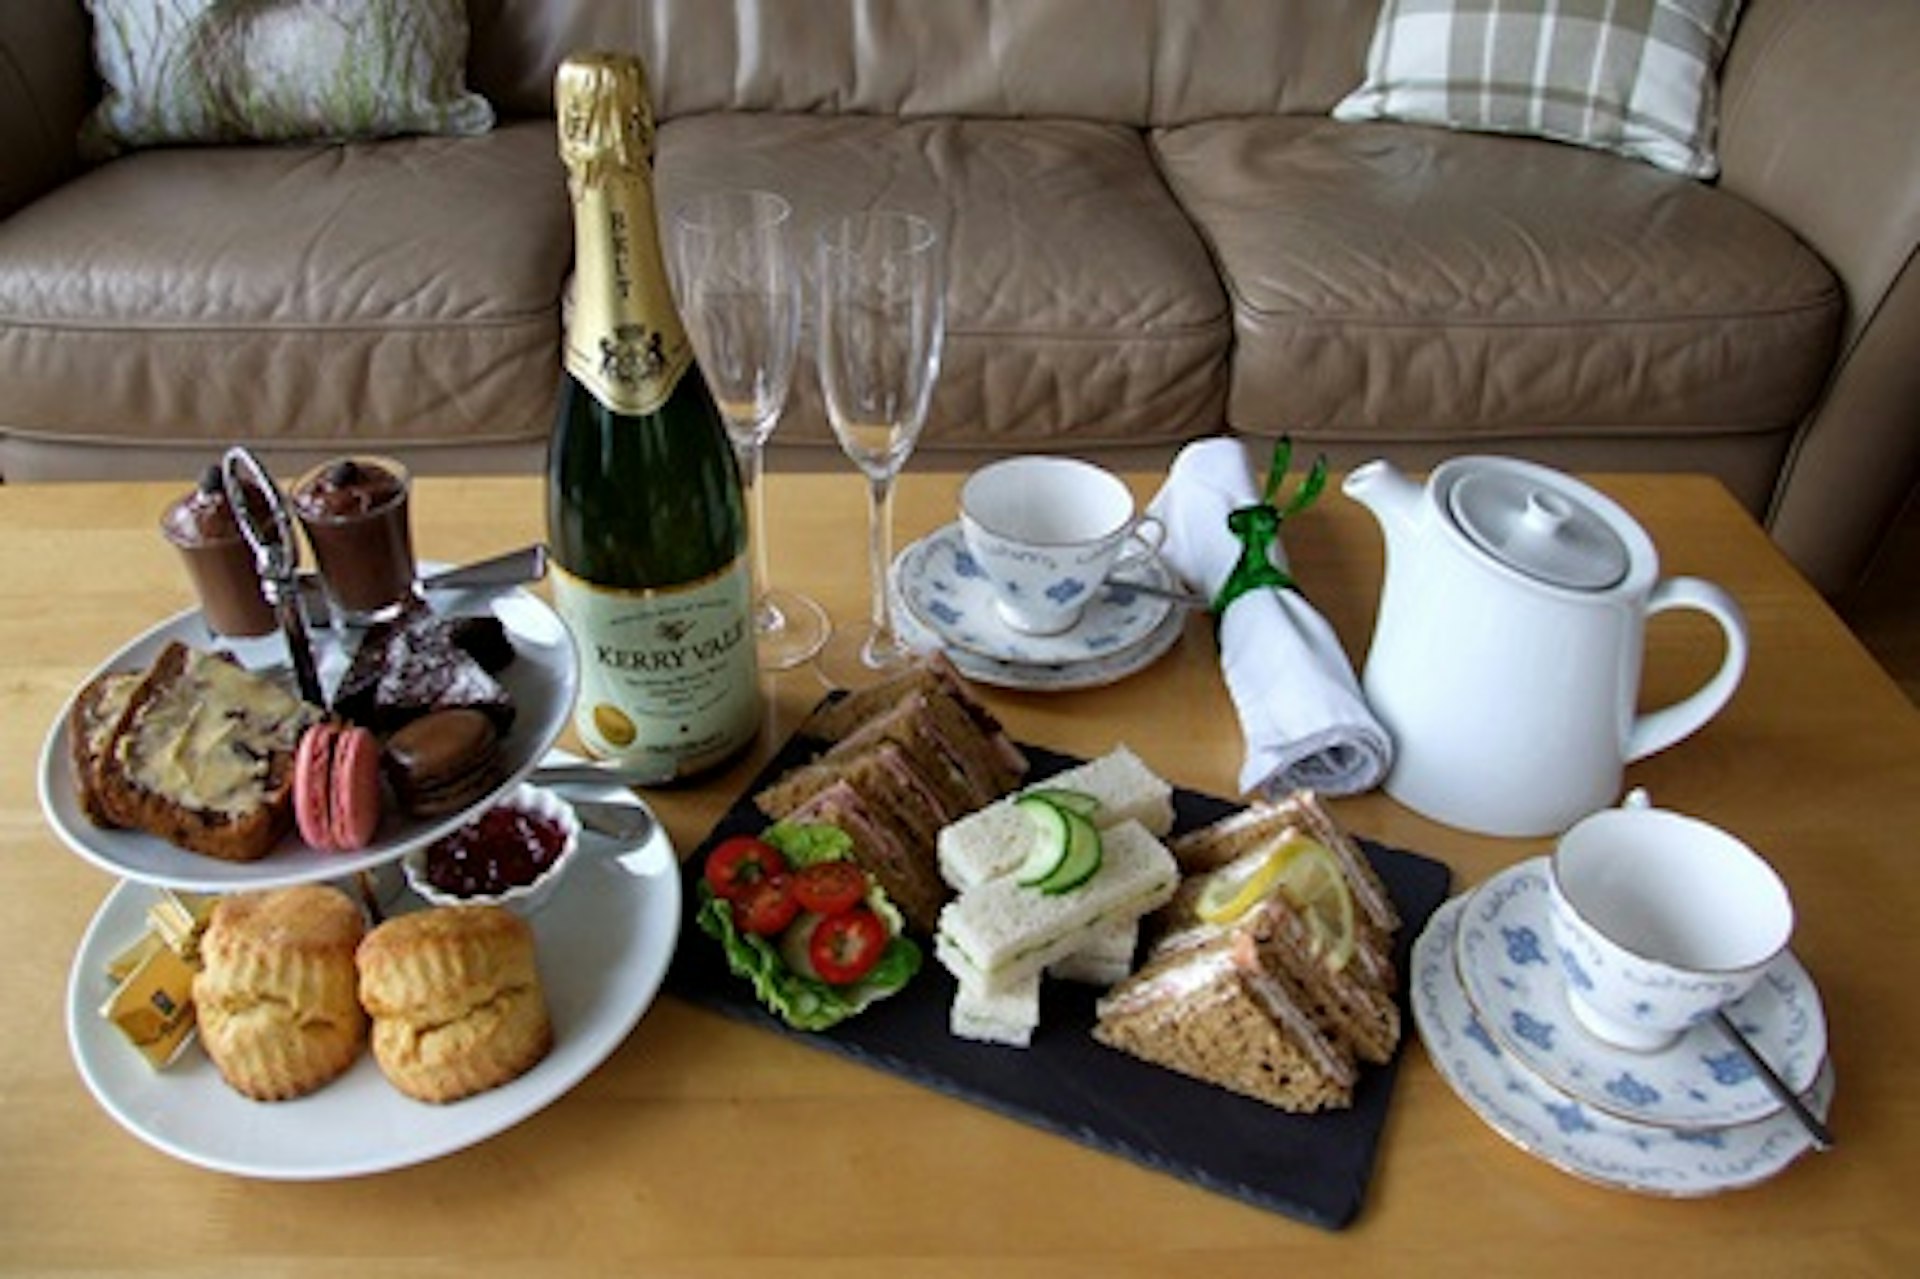 Vineyard Tour and Tasting with Sparkling Afternoon Tea for Two at Kerry Vale Vineyard 1